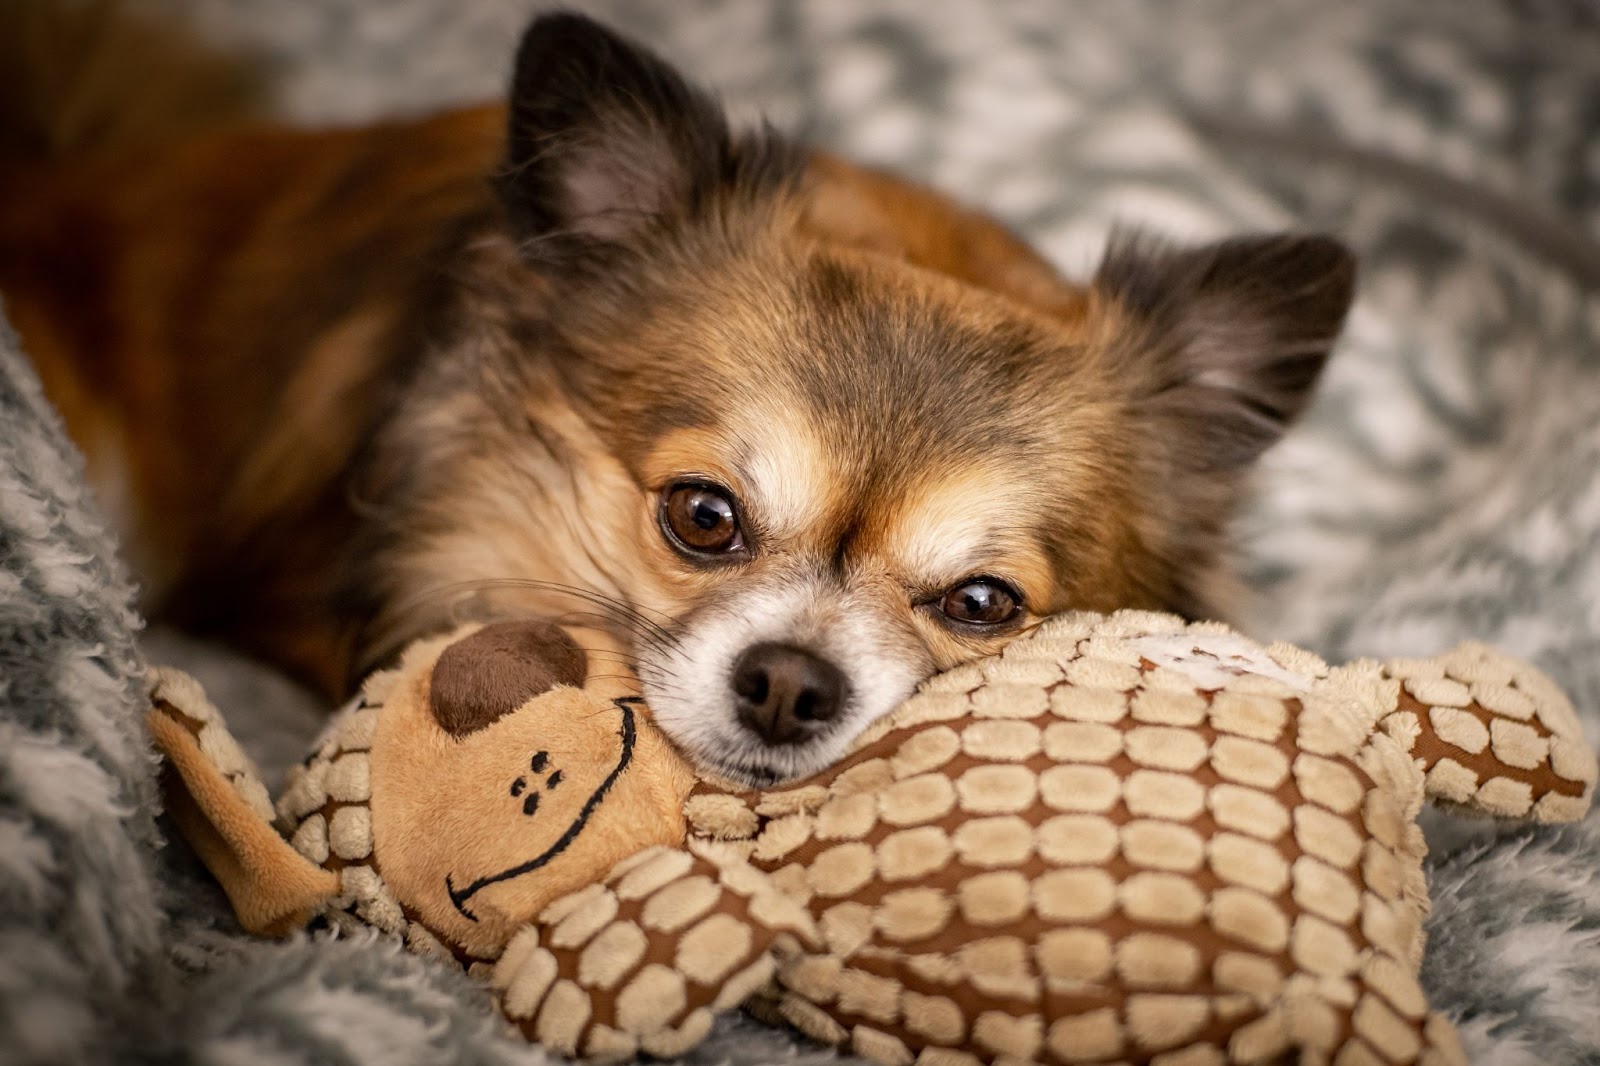 How Big Is A Chihuahua’s Heart?